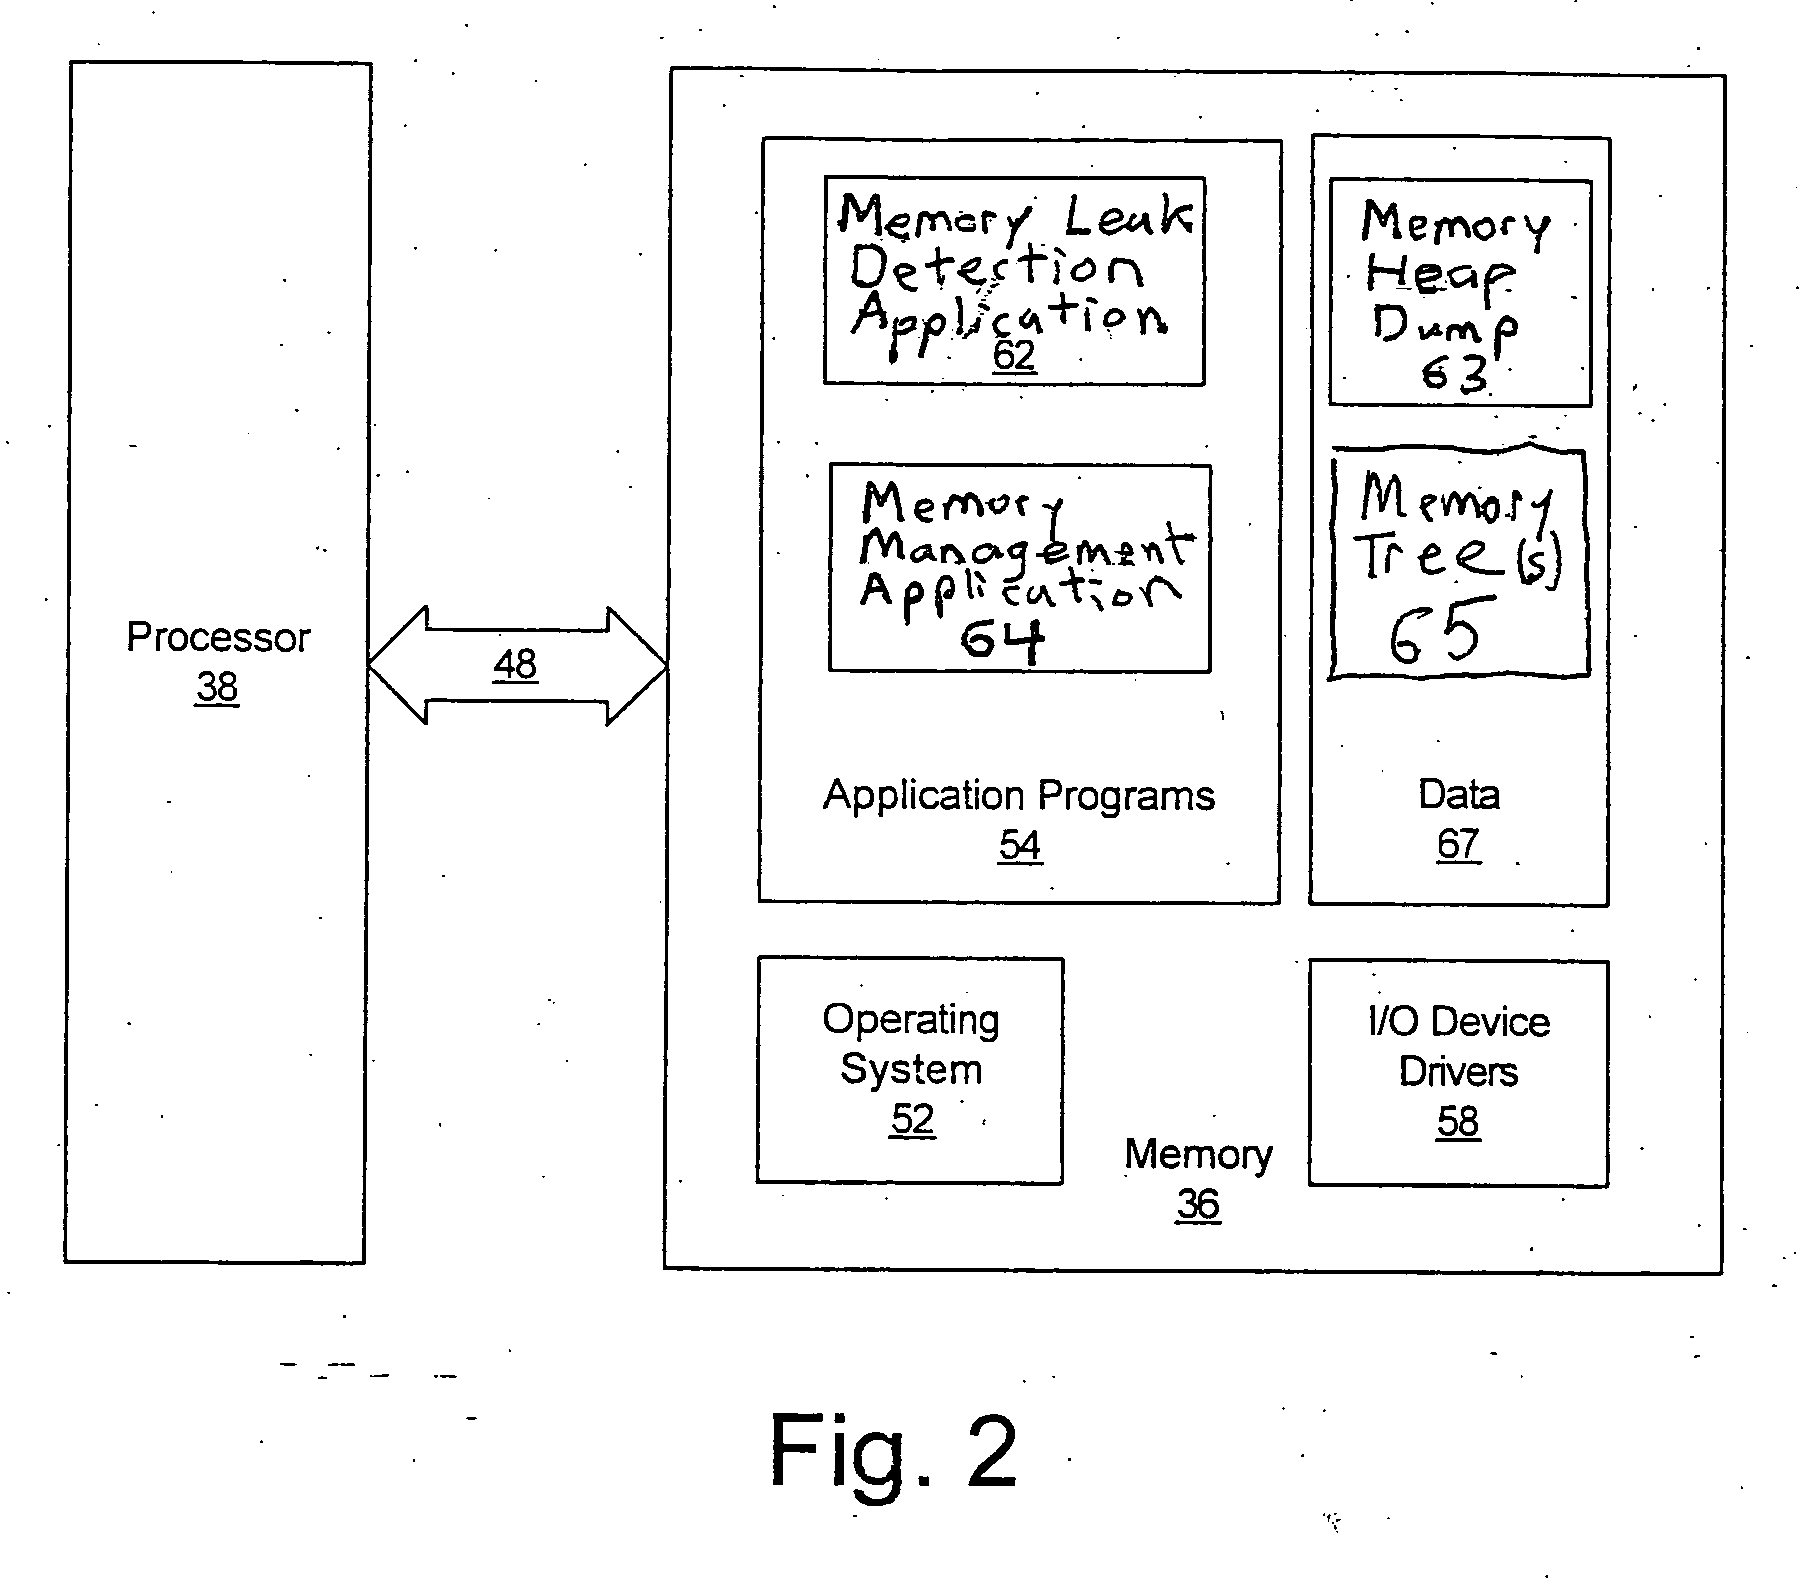 Methods, systems and computer program products for detecting memory leaks